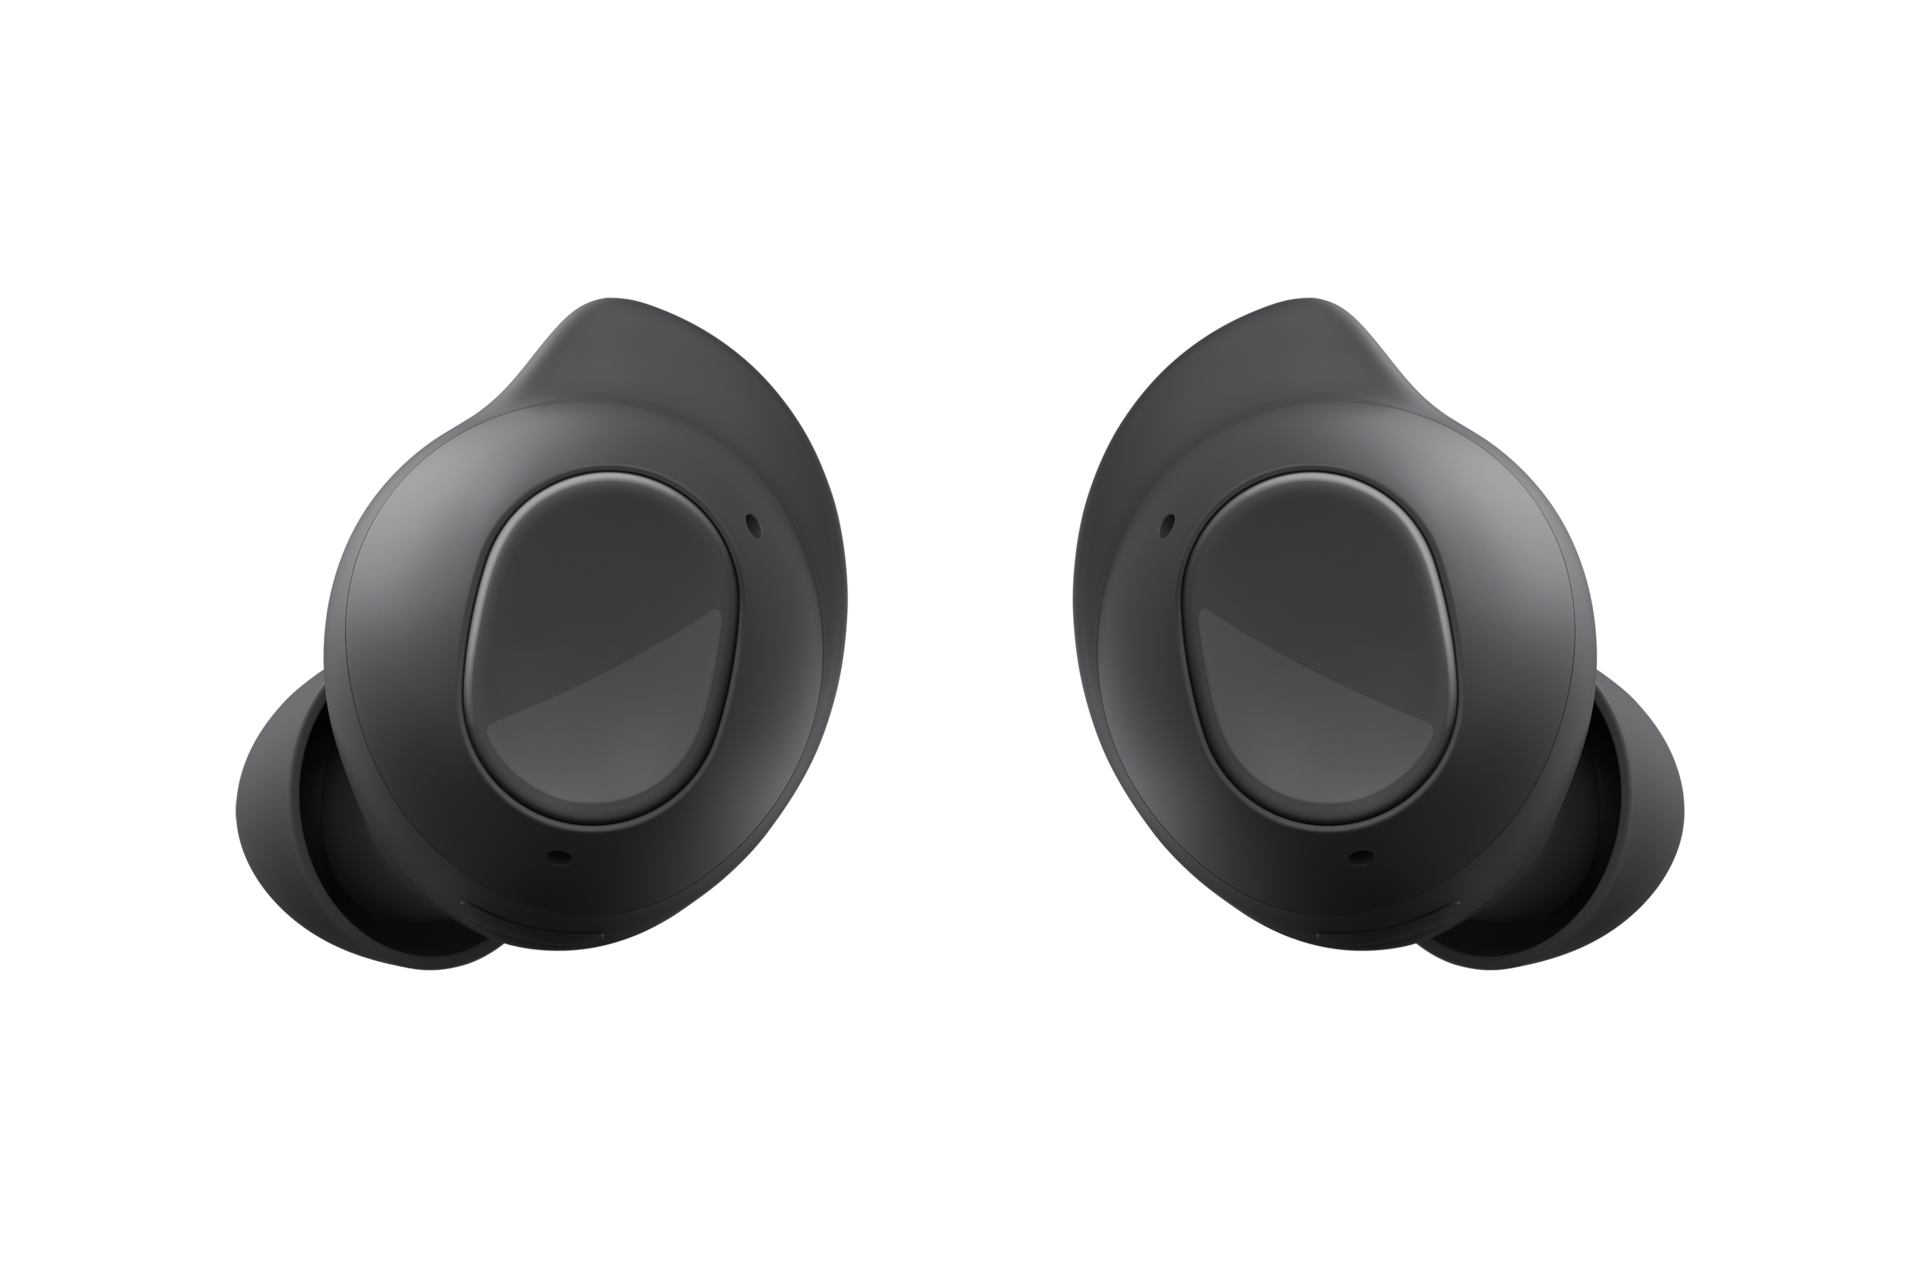 Buy the Galaxy Buds FE in Graphite color at Samsung Malaysia.